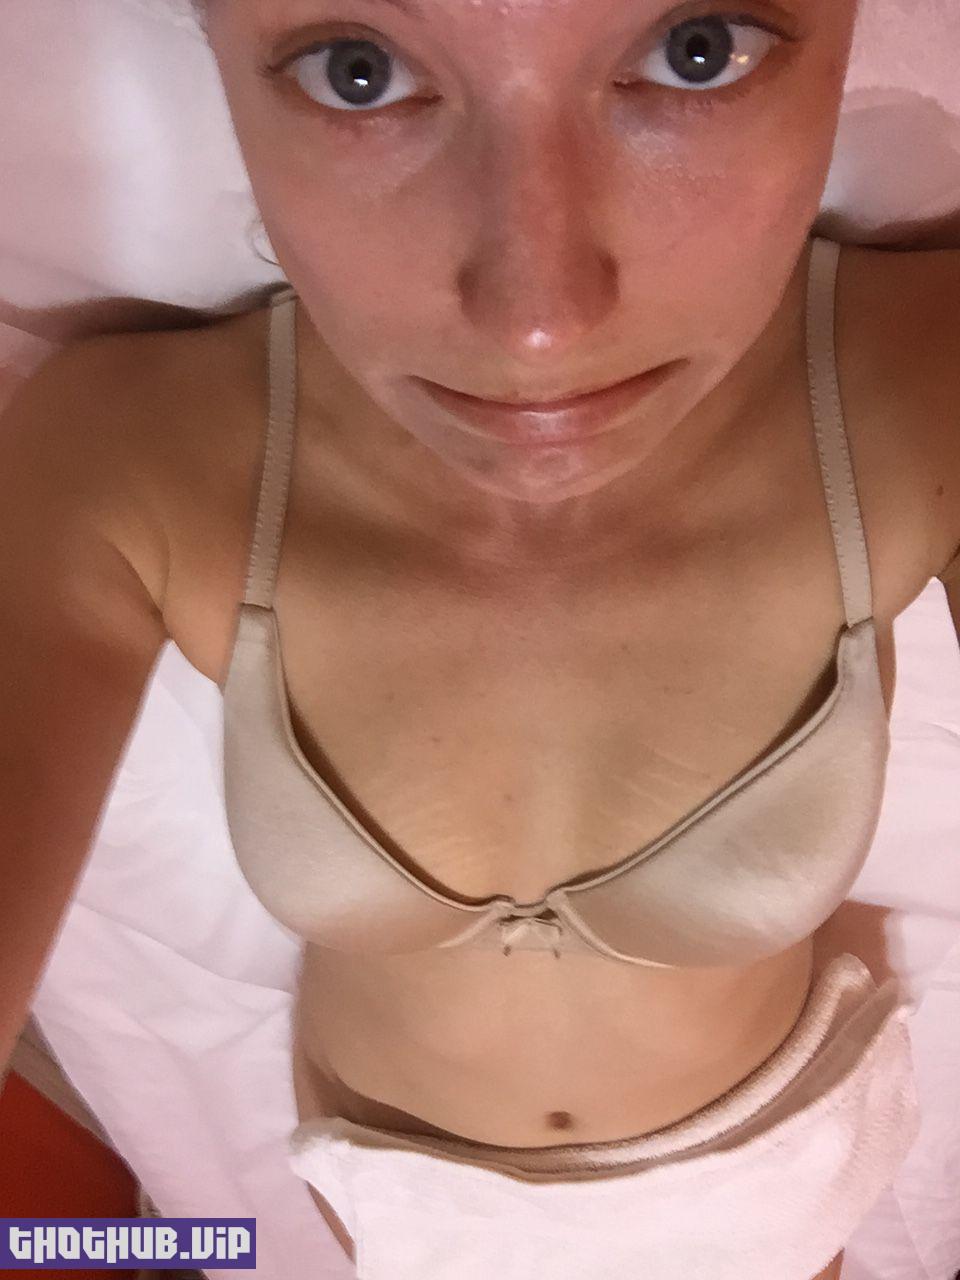 Actress Caitlin Gerard nude selfies leaked from hacked iCloud by The Fappening